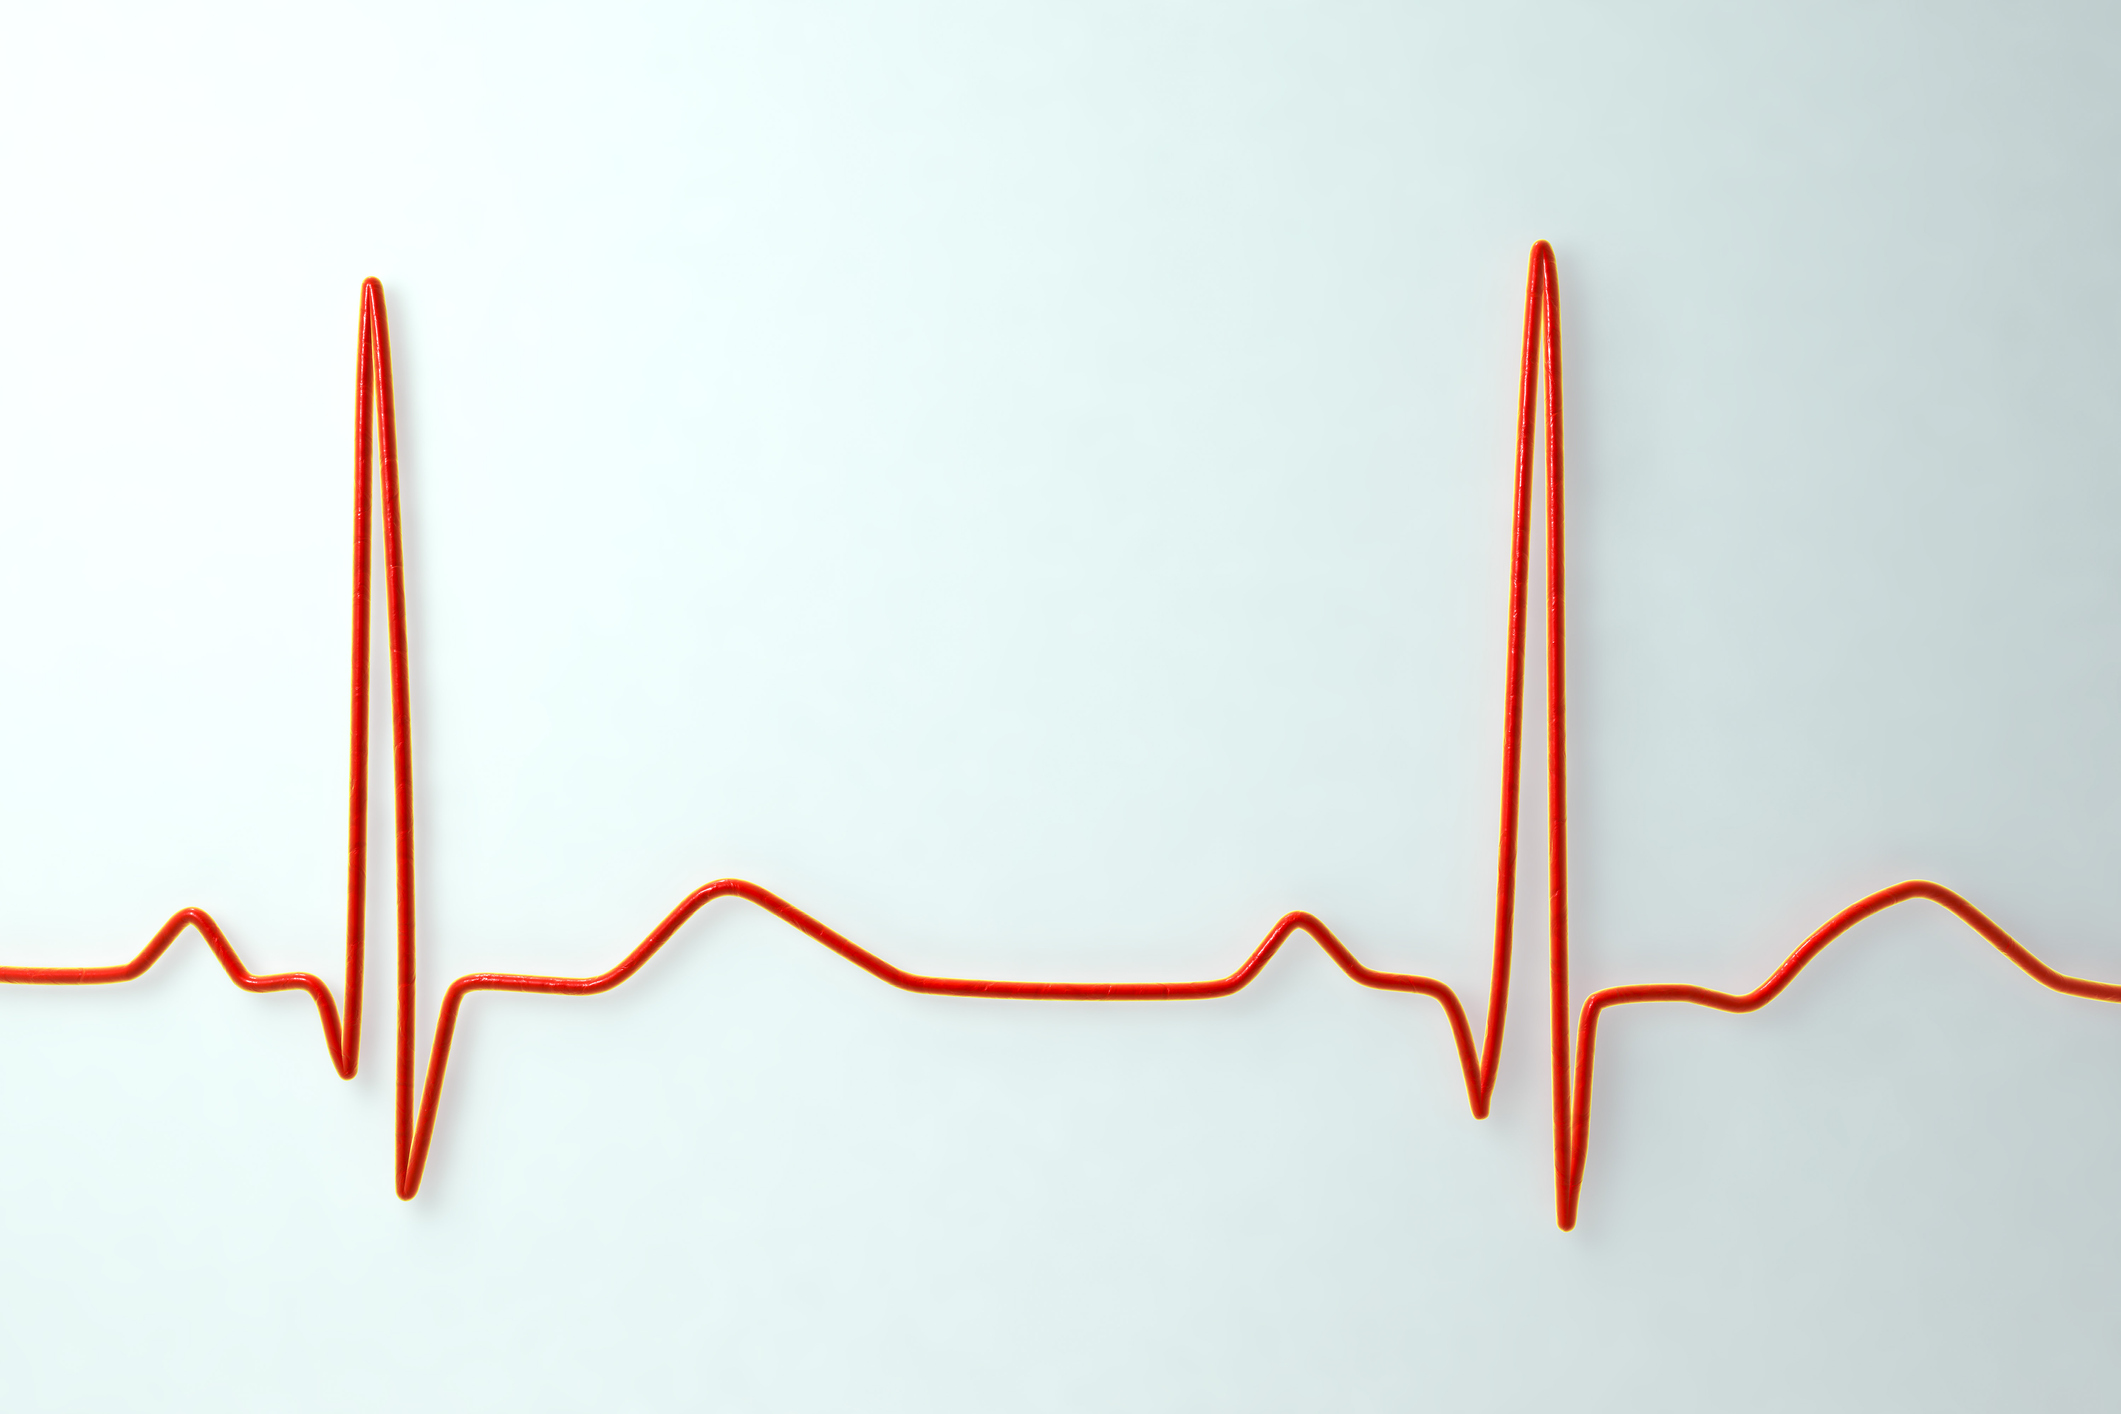 ECG. Computer illustration of an electrocardiogram (ECG) showing a normal heart rate.